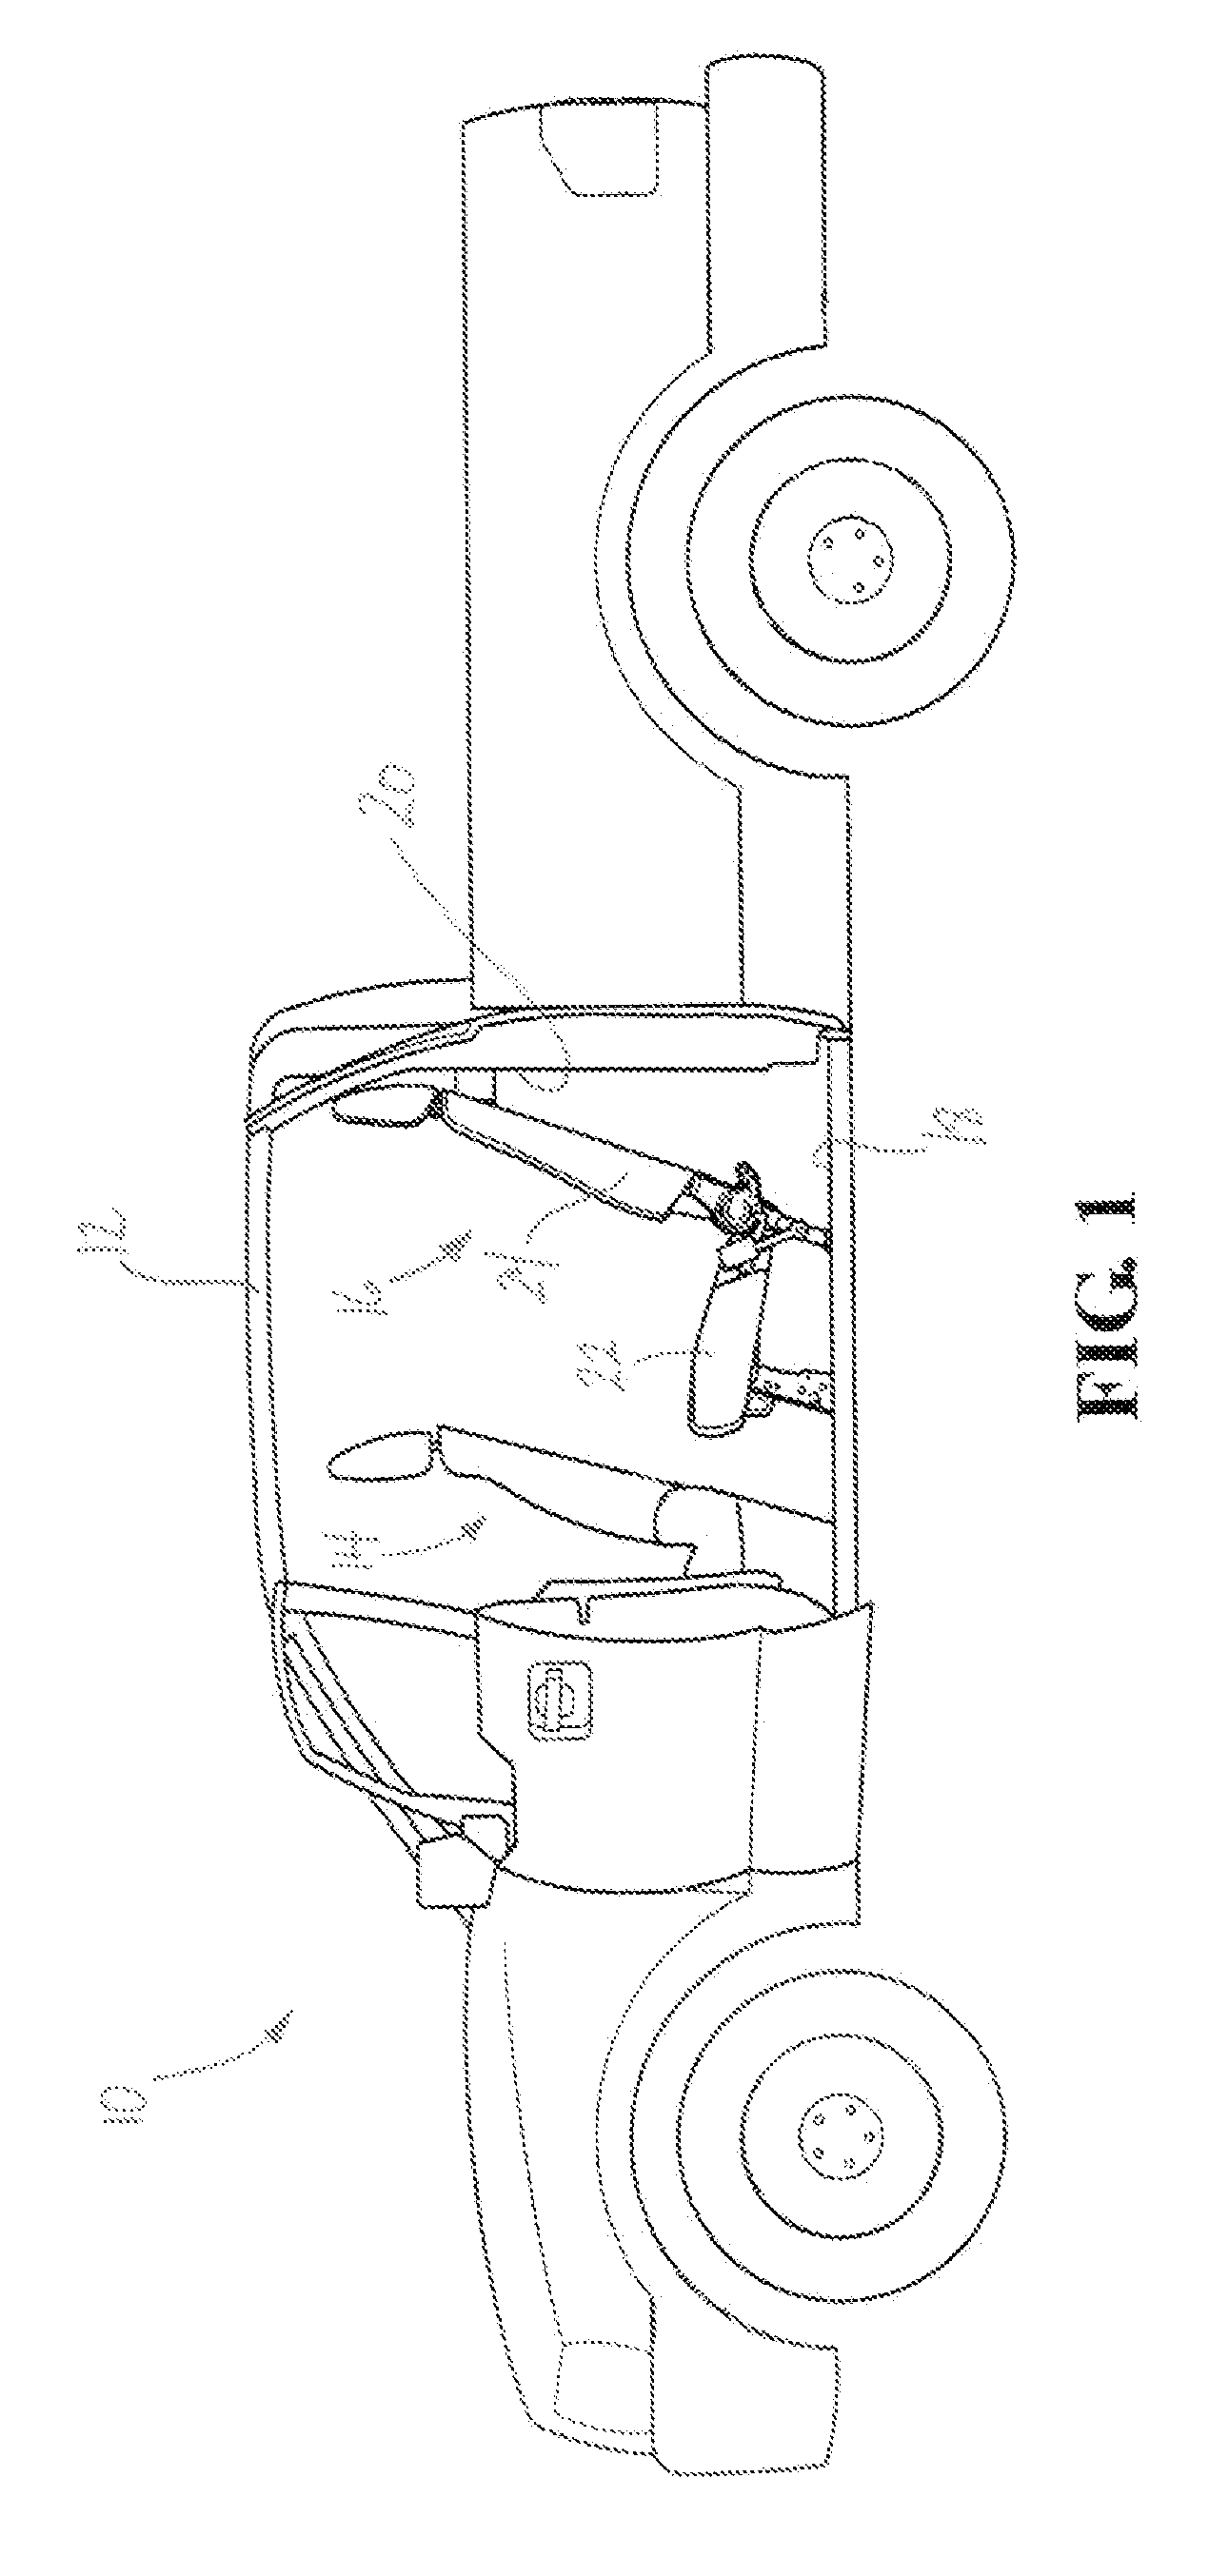 Multi-function rear seat structure mechanism